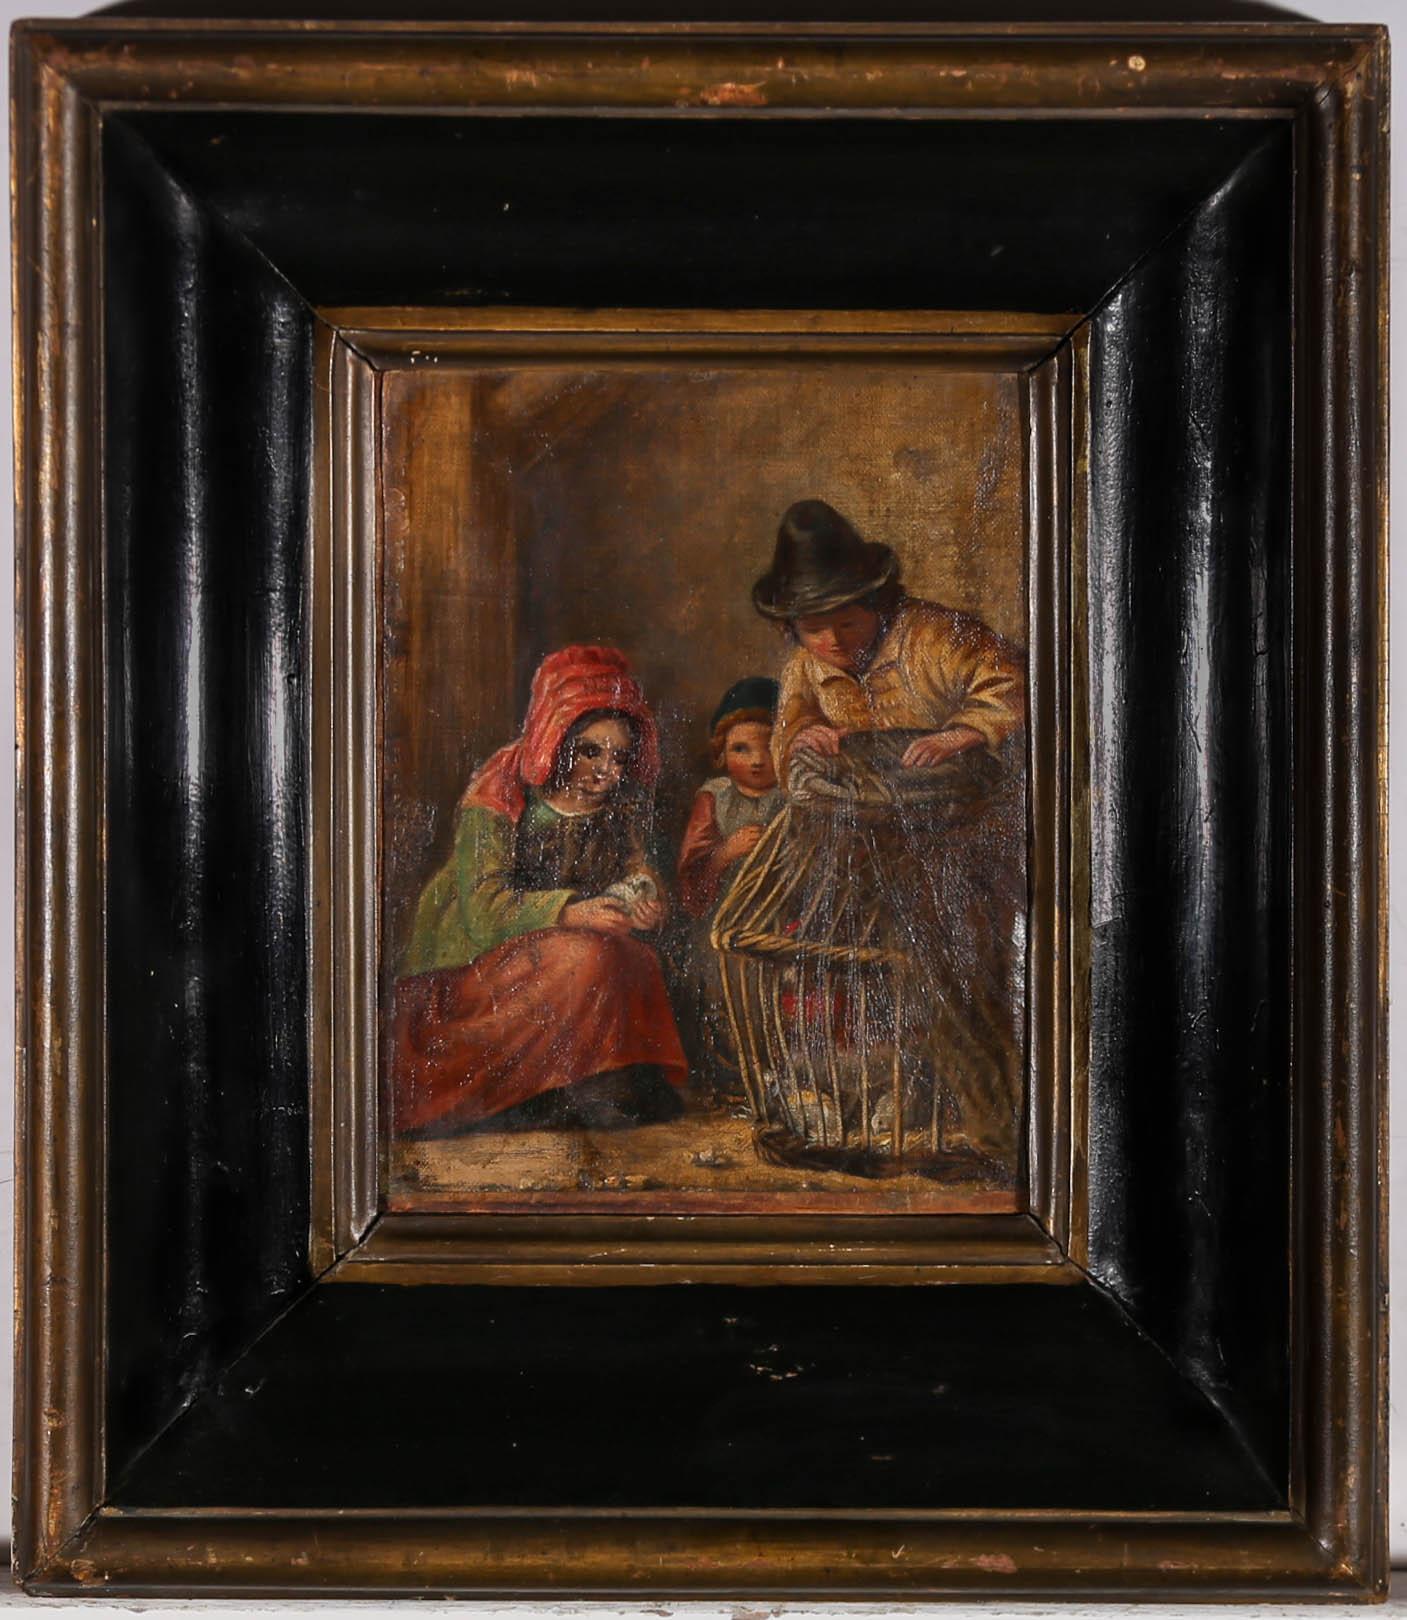 This charming scene takes inspiration from the works of Henry Charles Bryant who was renowned for his farmyard and market compositions. The painting depicts three children around a cage of doves. They have taken one bird outer of the cage to gently